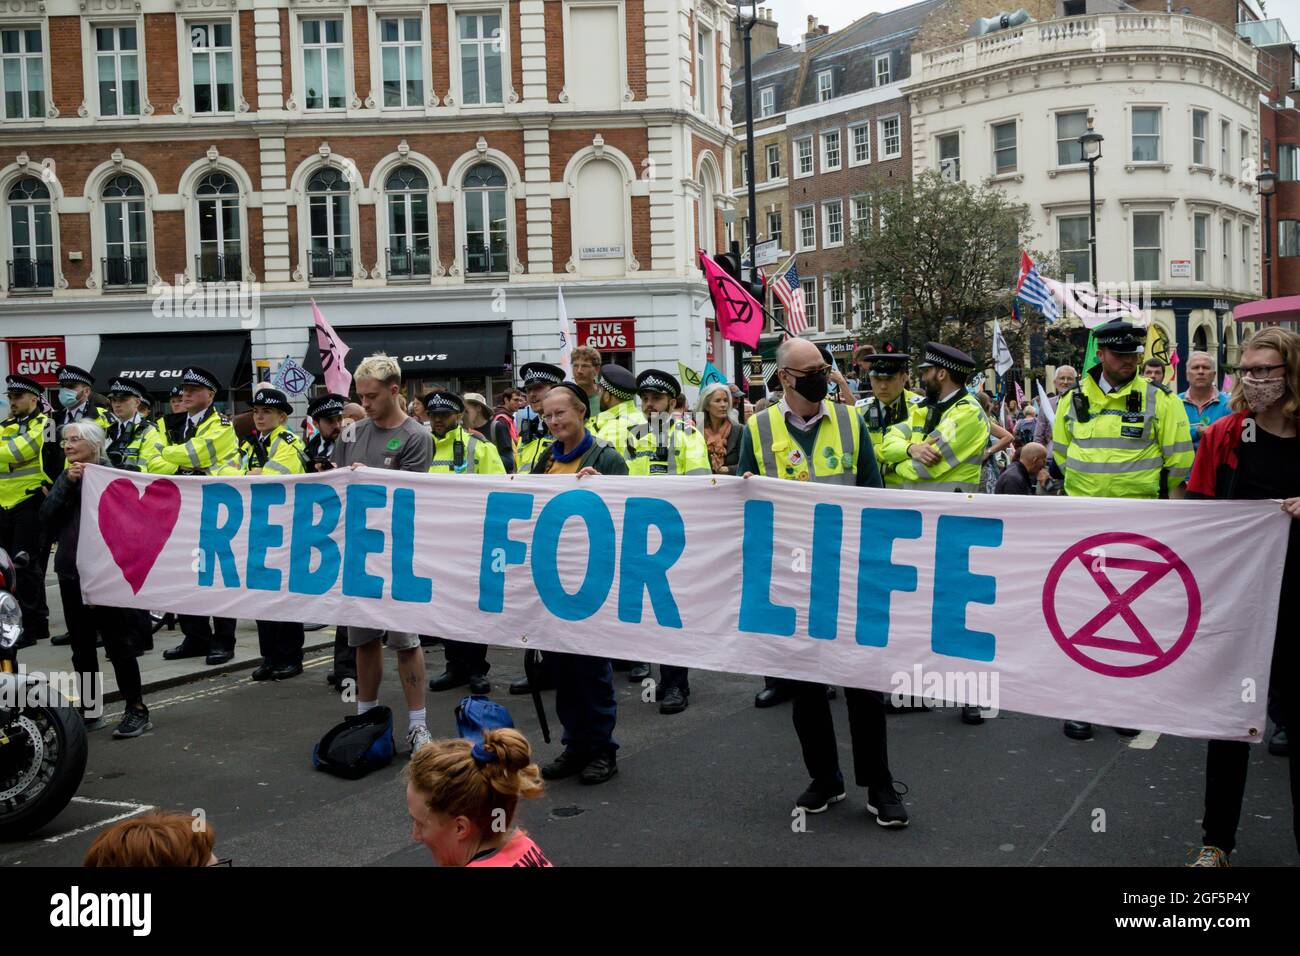 London, United Kingdom, 21st August 2021:- Extinction Rebellion protesters hold a rebel for life banner during a protest in Central London Stock Photo